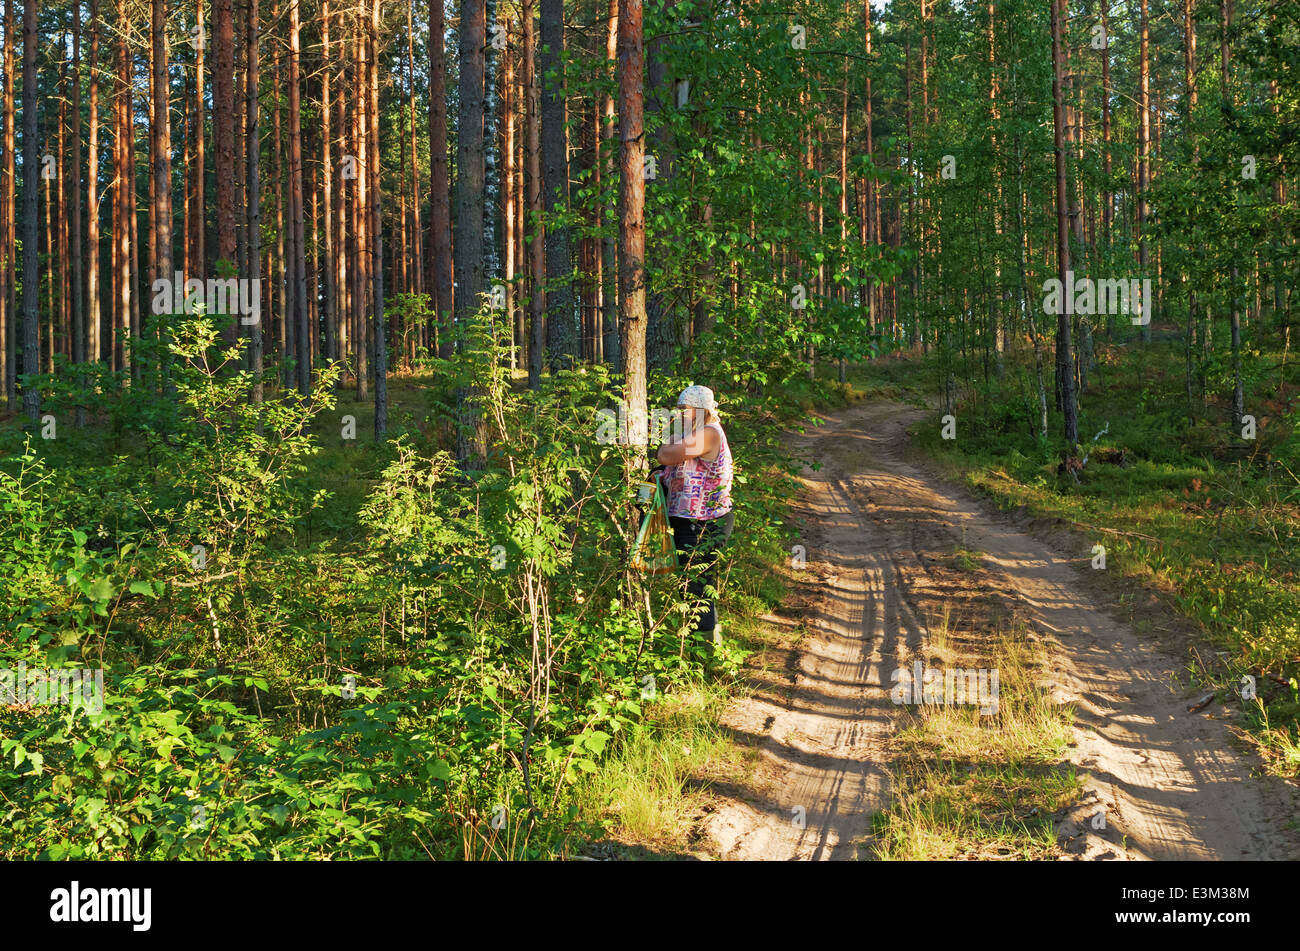 Rural lifestyle 2013. The woman picks berries in the forest. Stock Photo